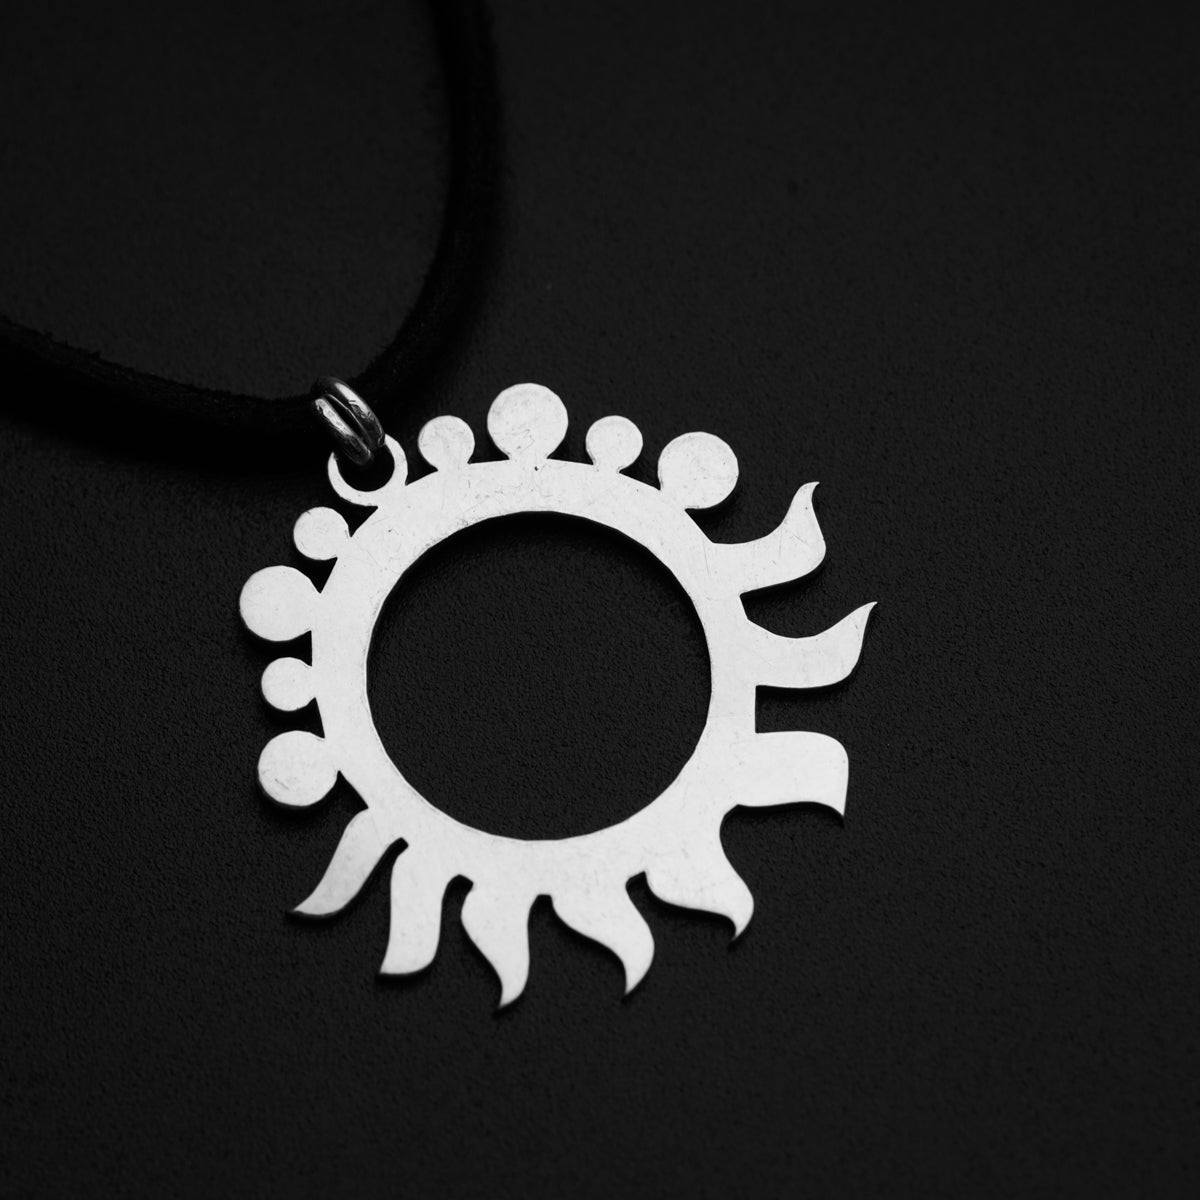 a necklace with a circular design on a black background